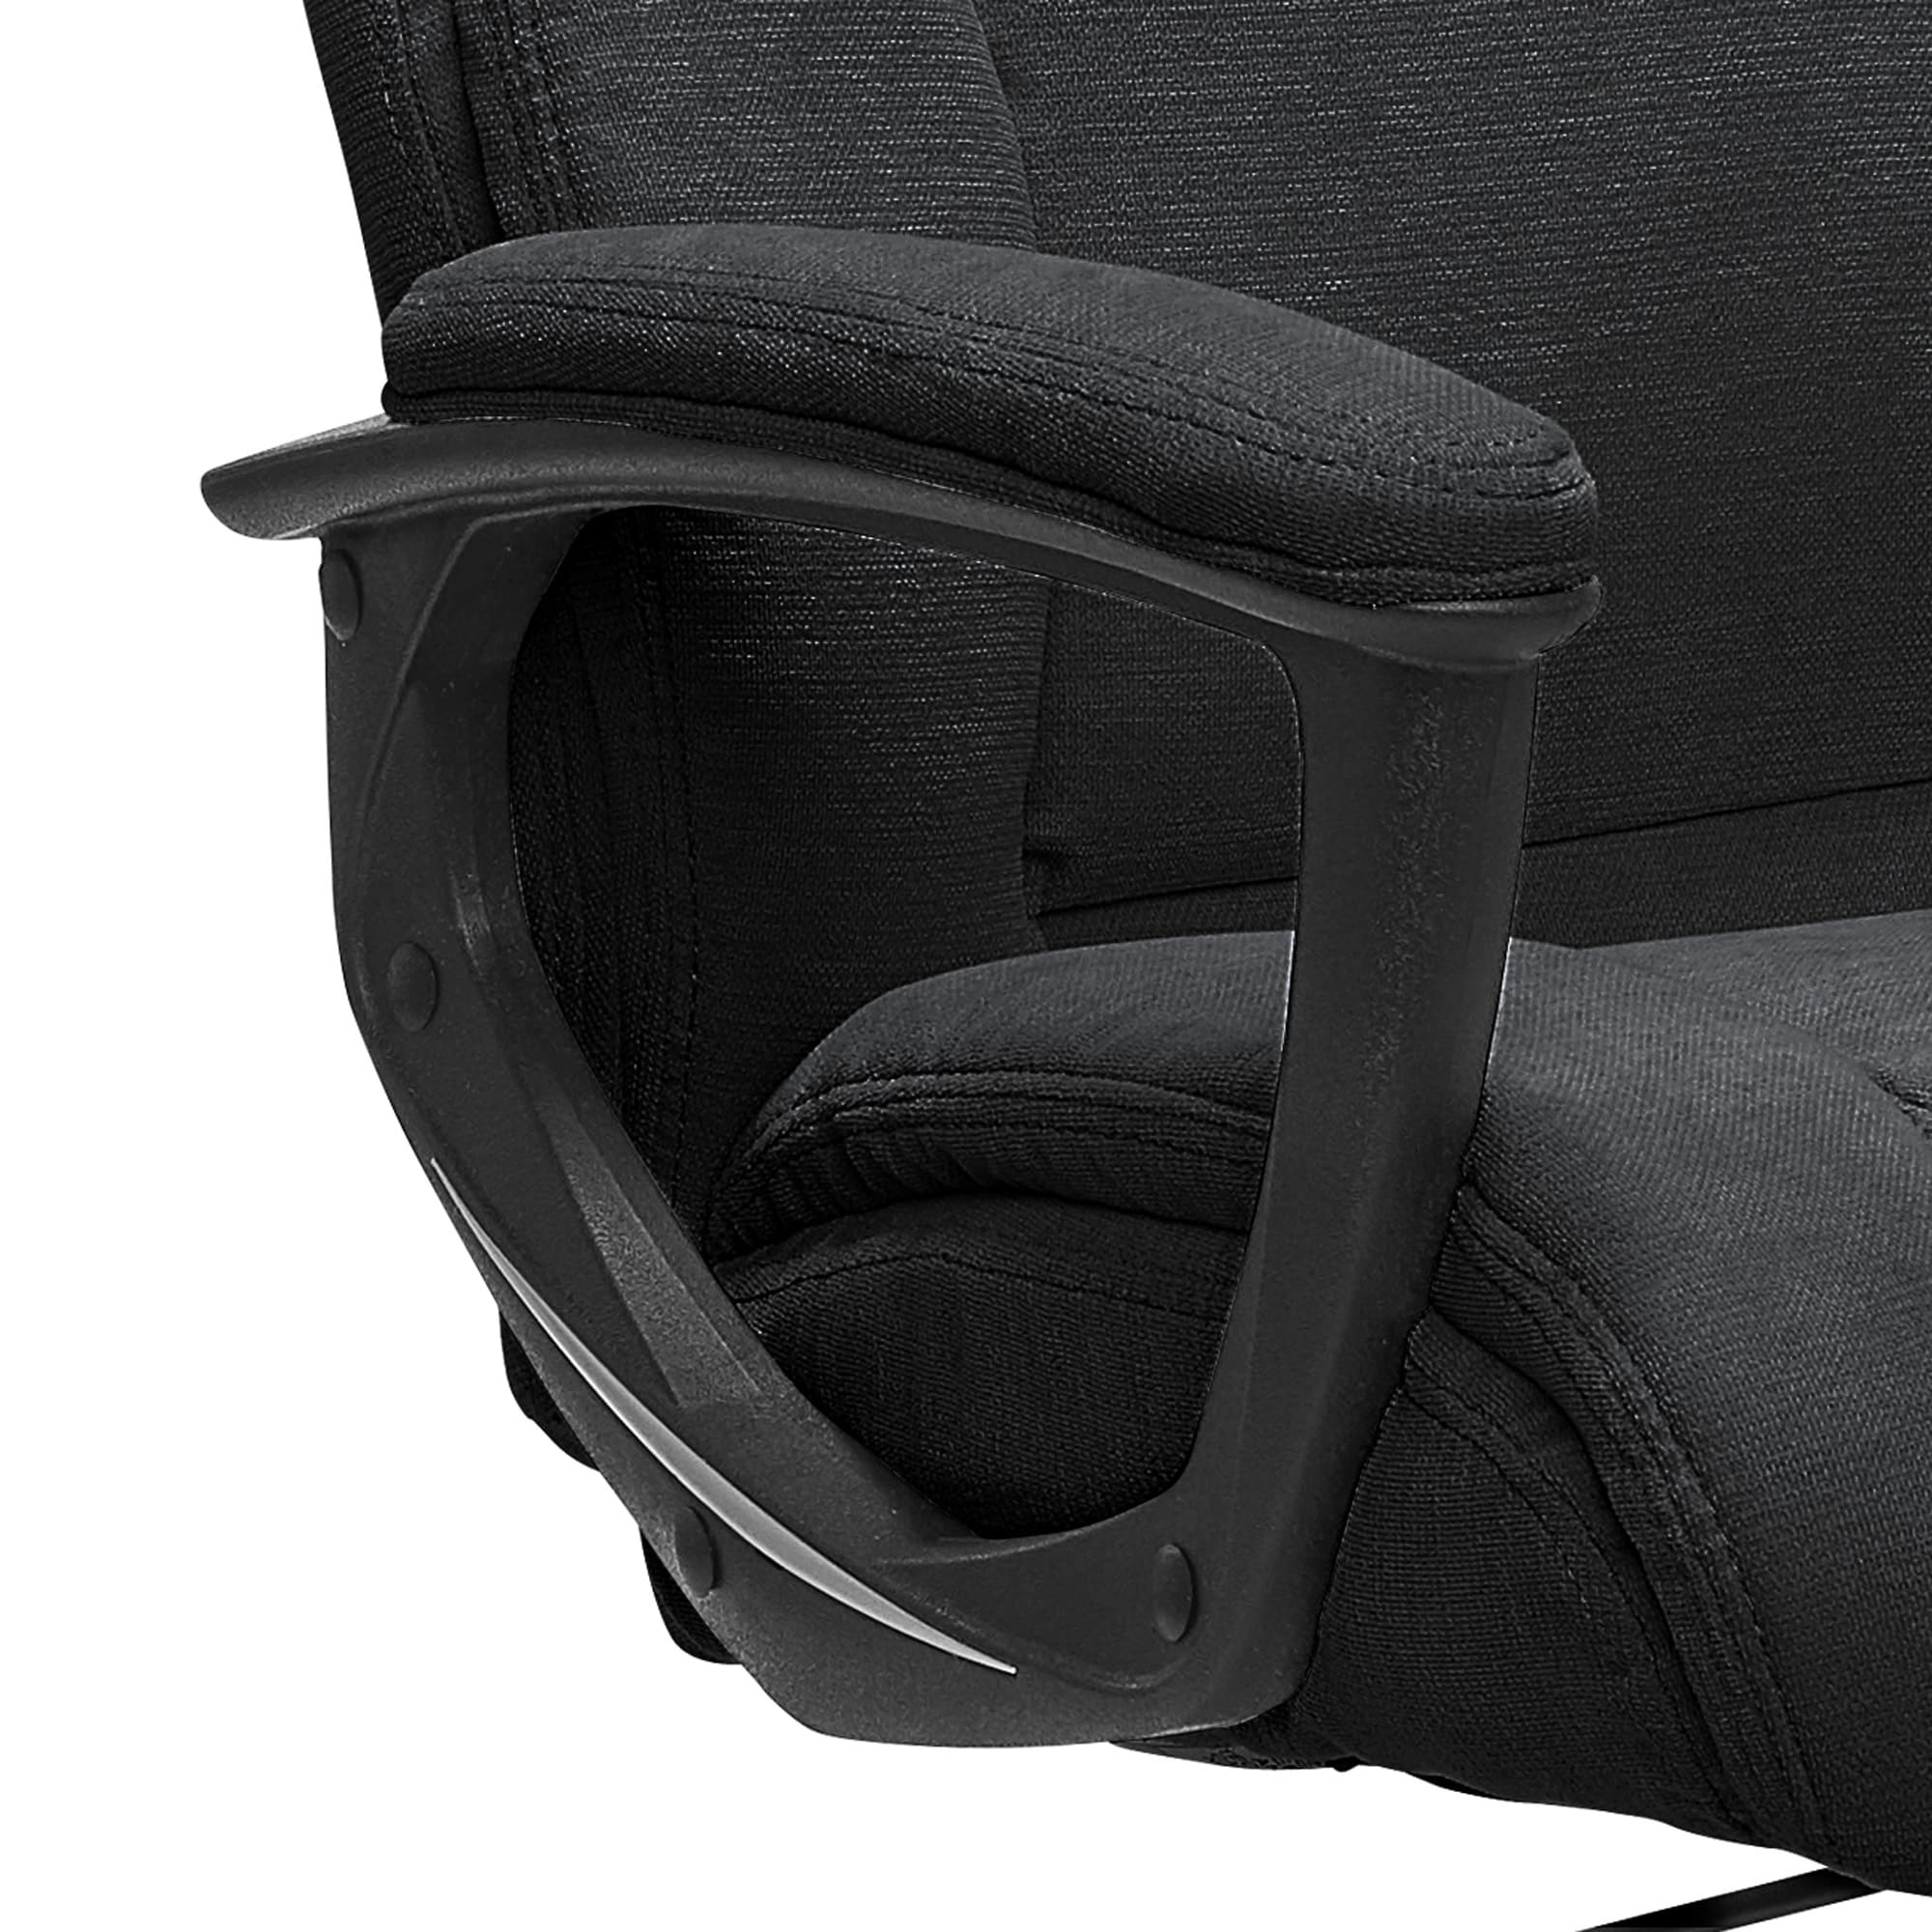 https://ak1.ostkcdn.com/images/products/is/images/direct/196ac9099aed70e8e9df3350fd1547e87a5683dc/Serta-Style-Hannah-II-Office-Chair.jpg